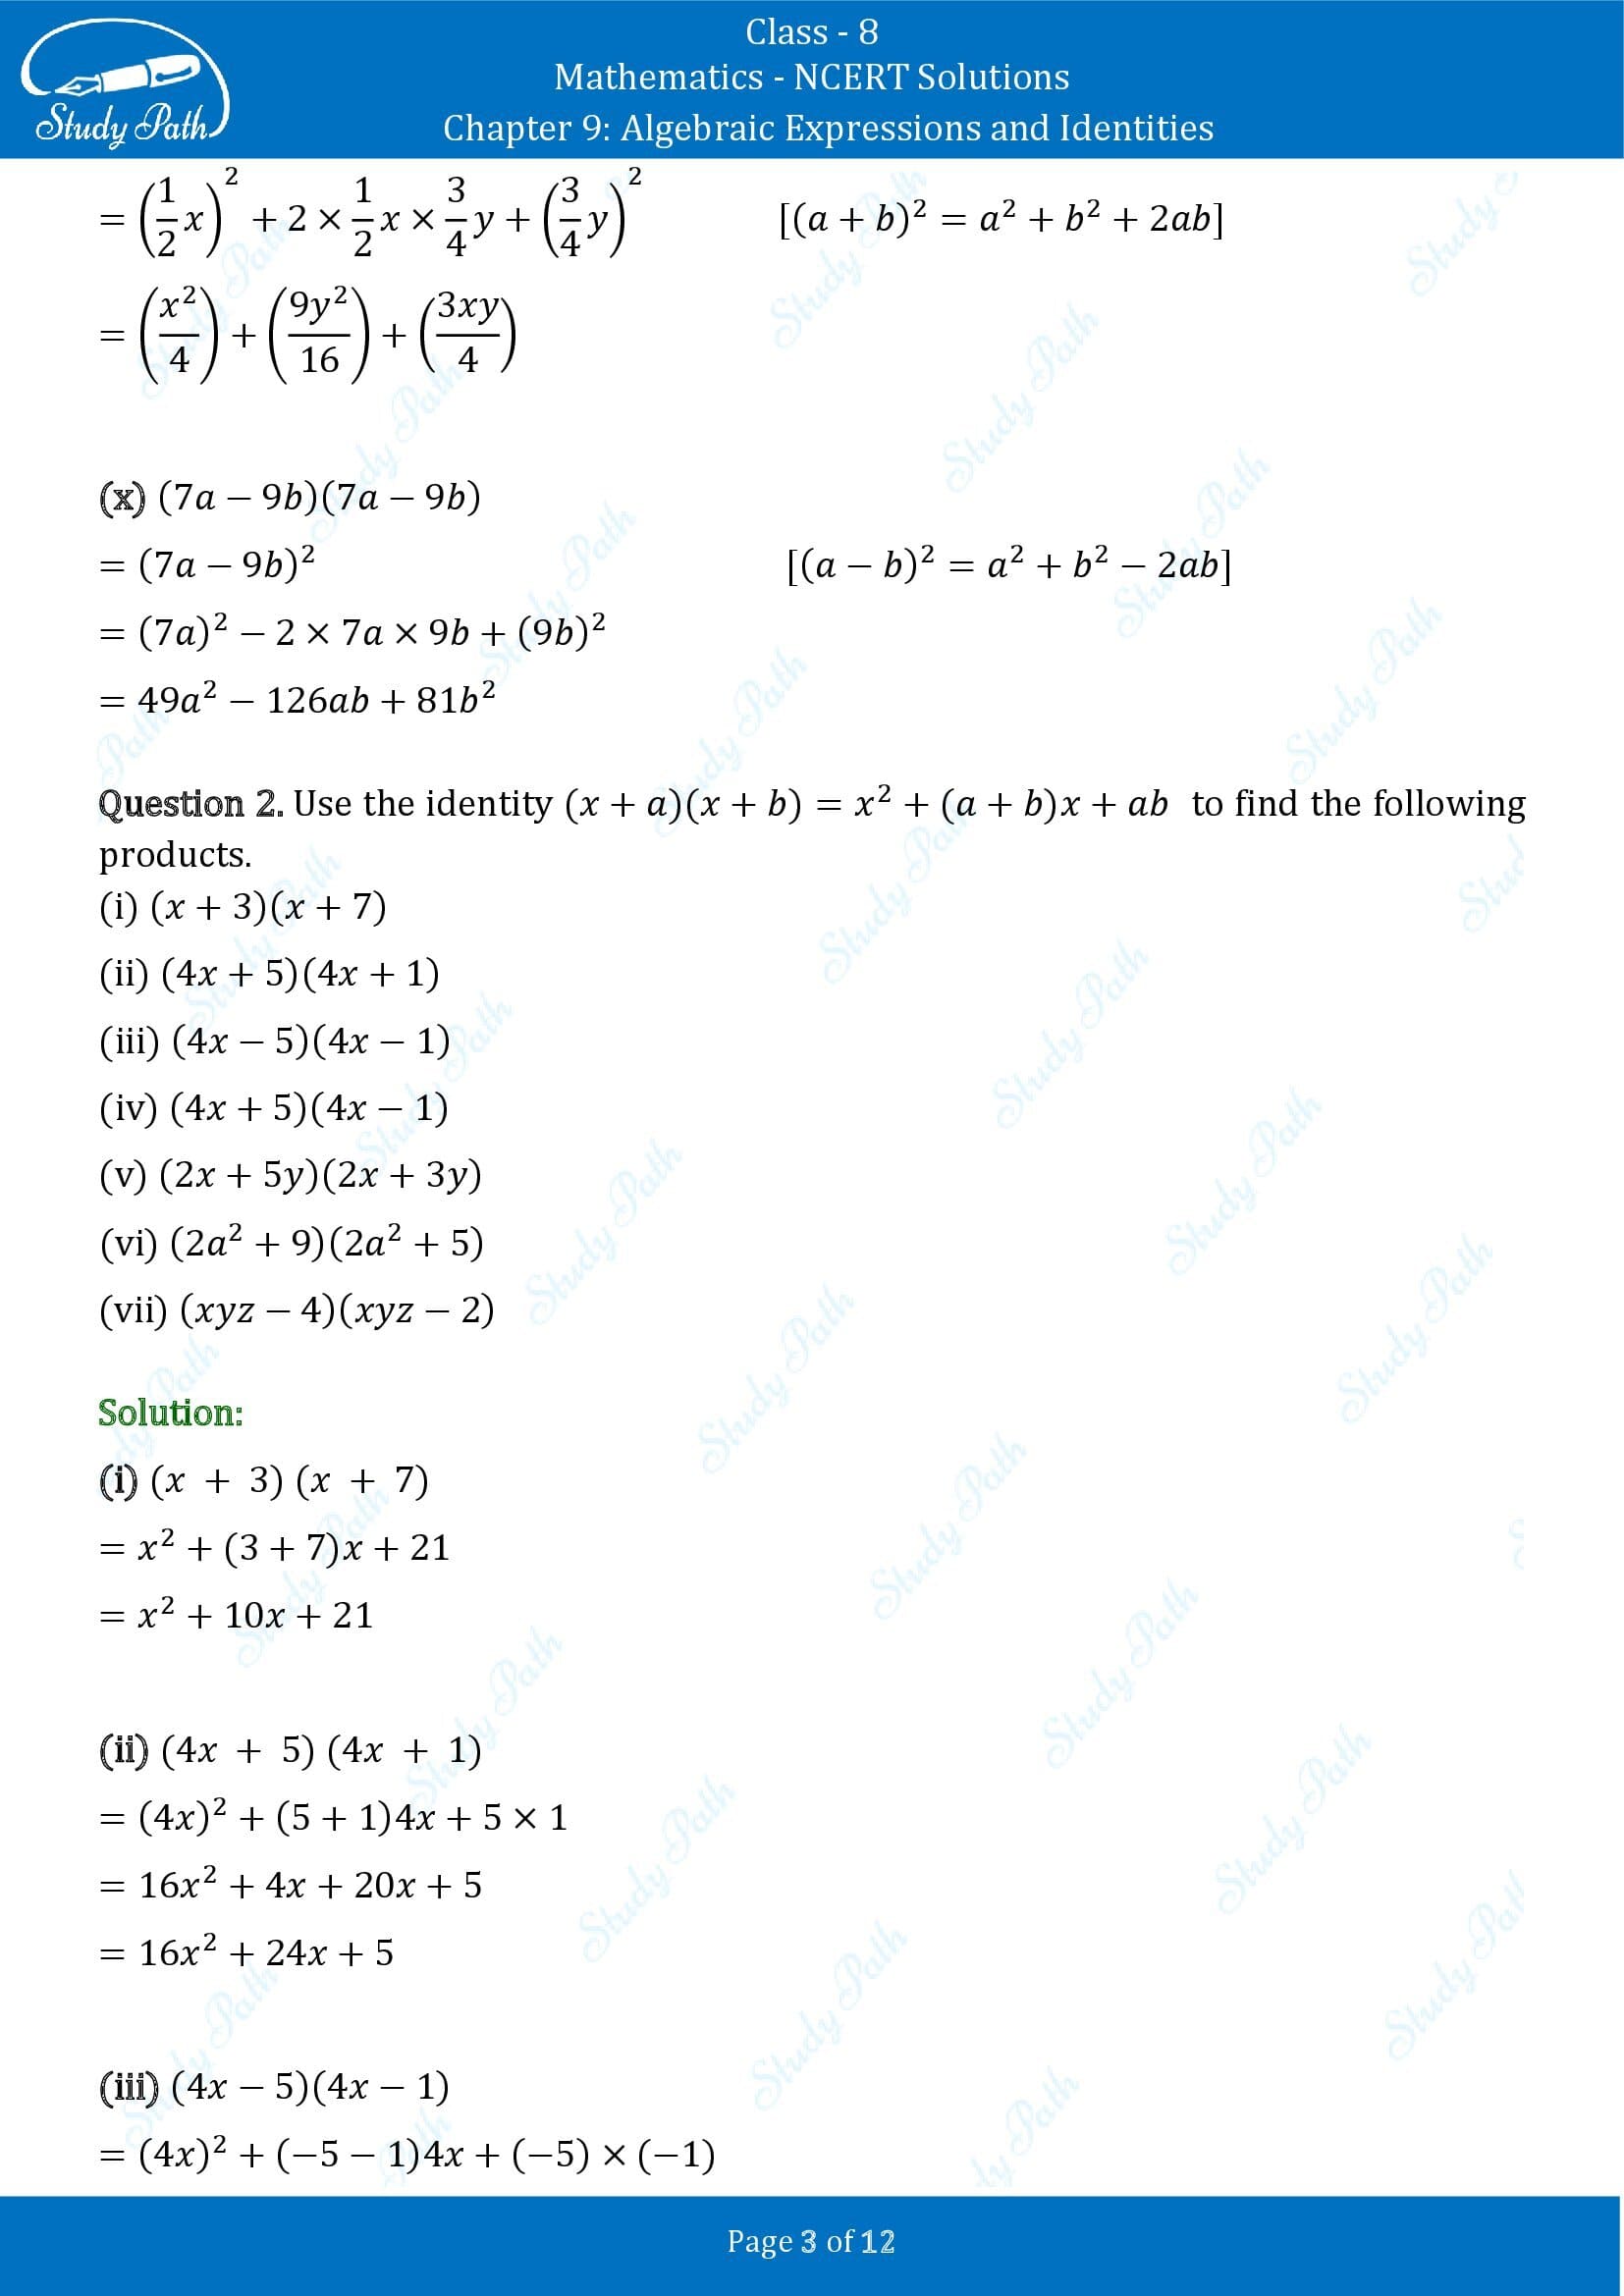 NCERT Solutions for Class 8 Maths Chapter 9 Algebraic Expressions and Identities Exercise 9.5 00003